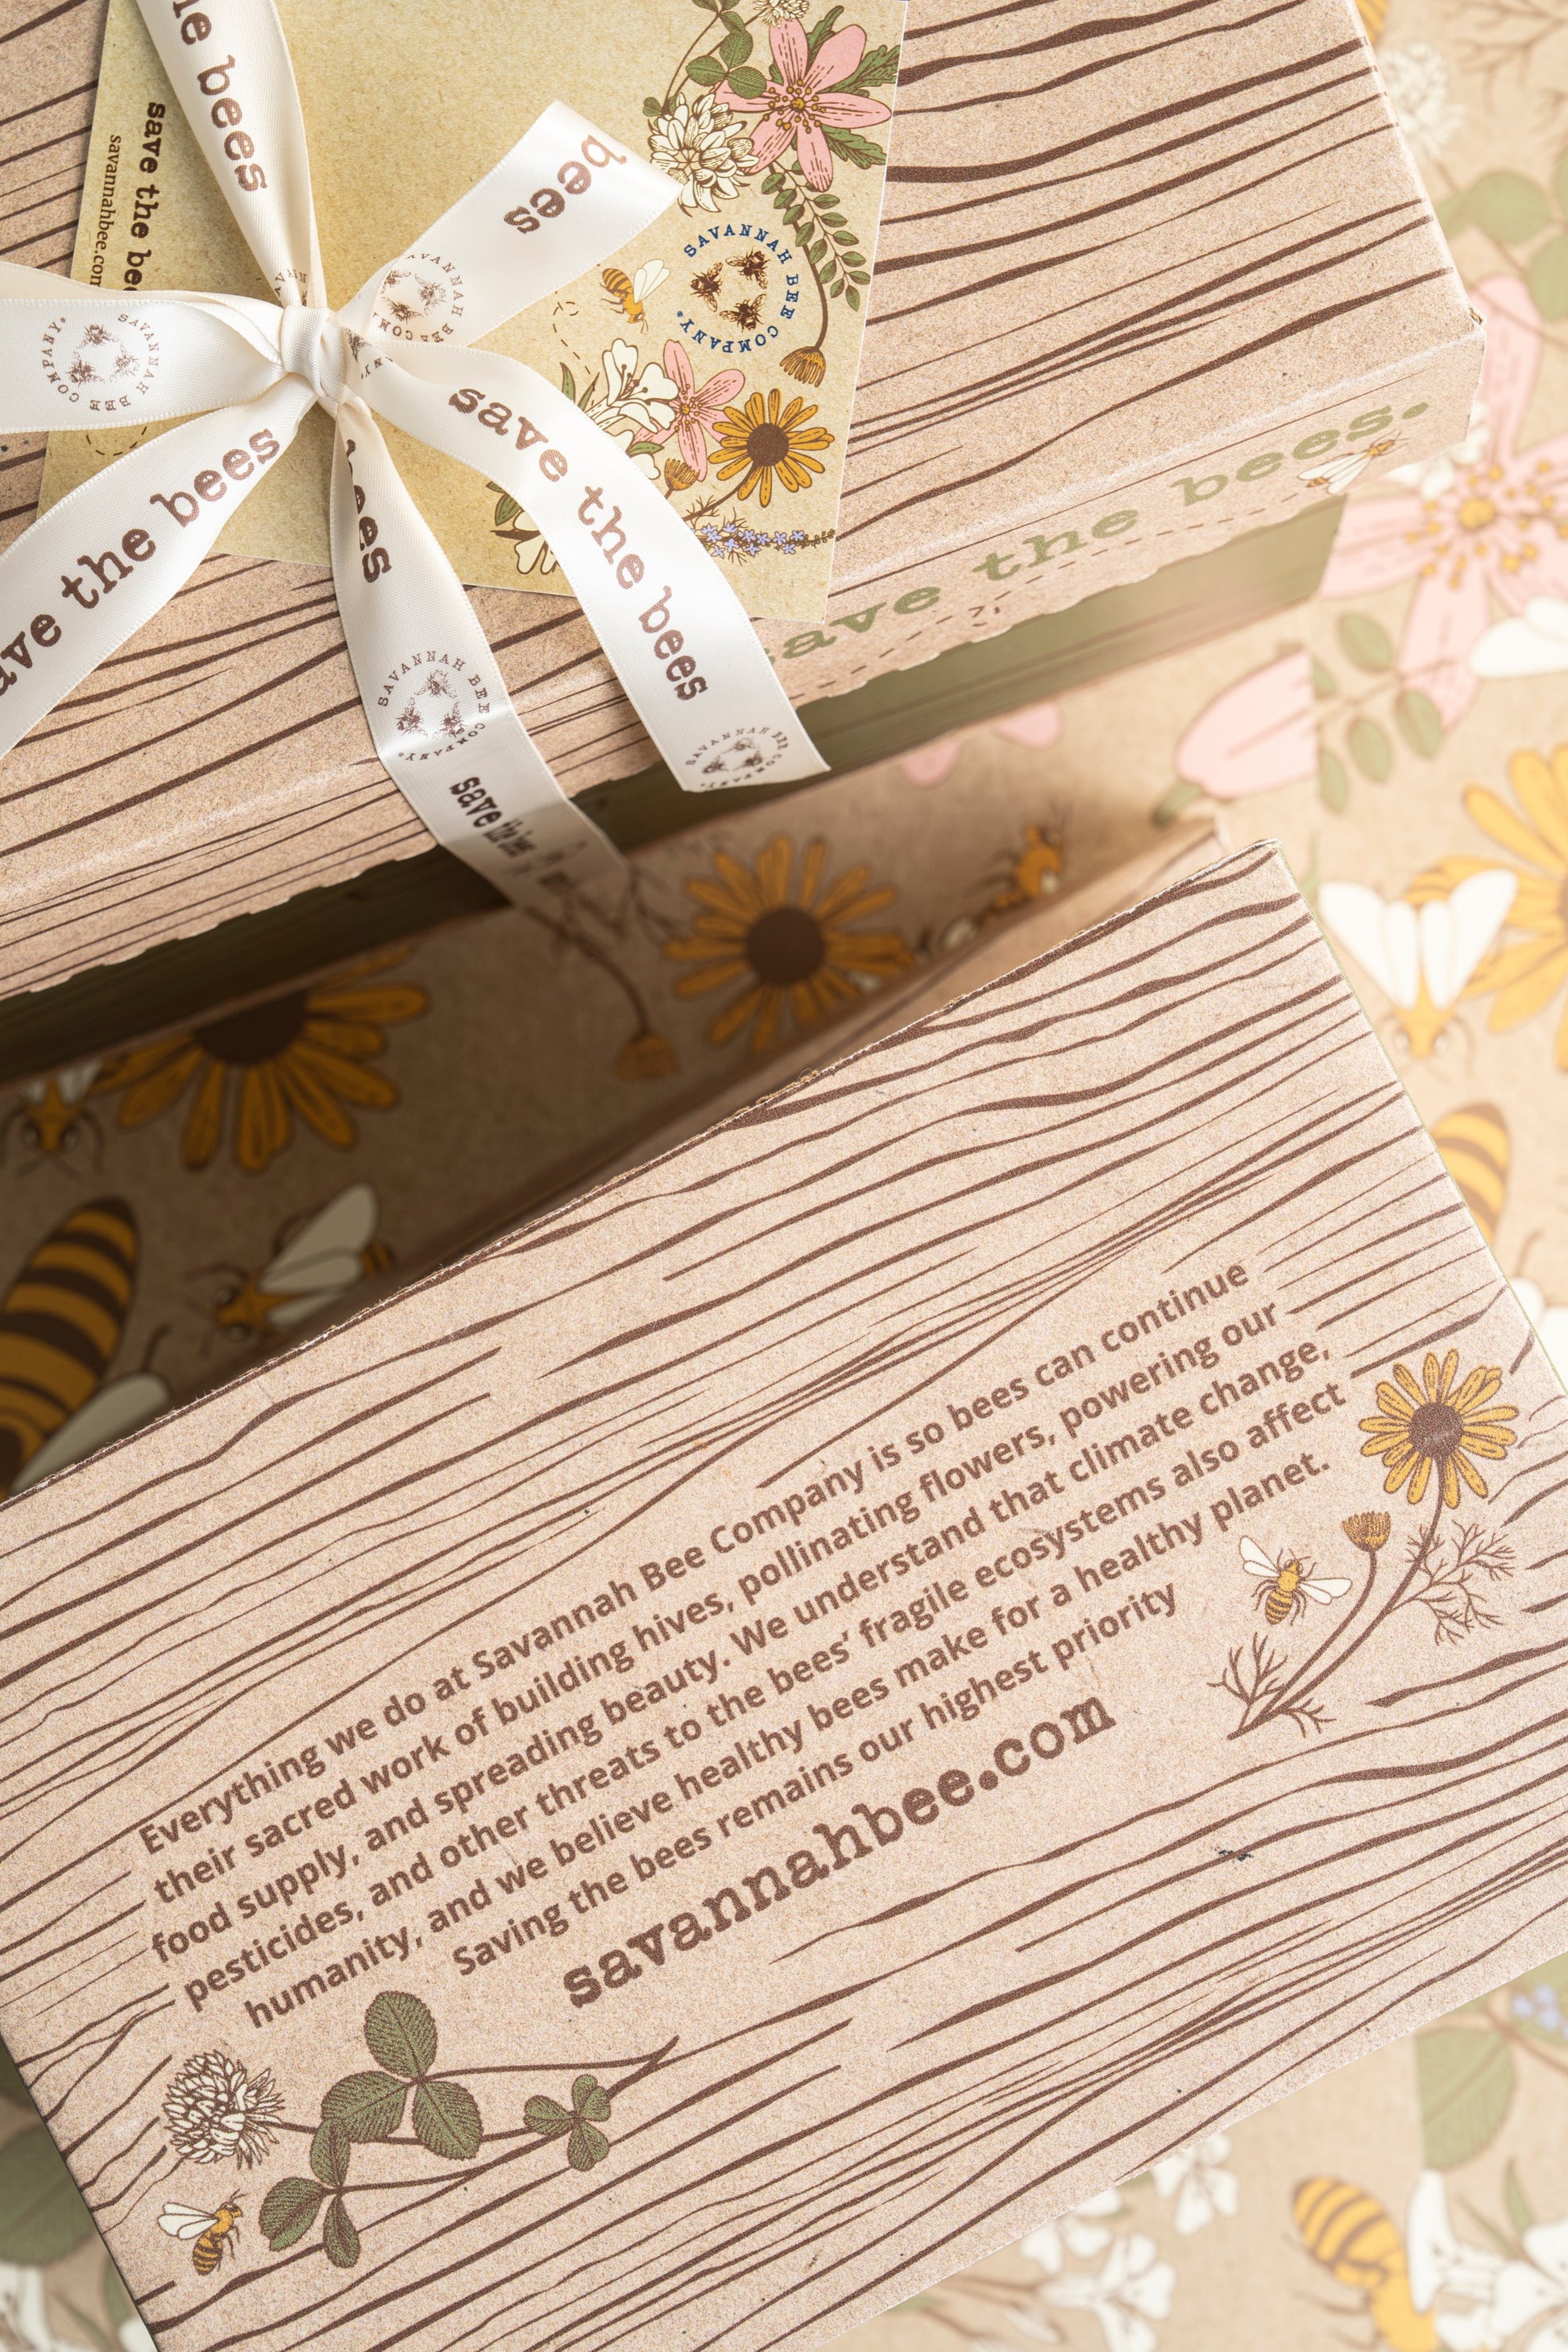  The bottom of a gift box with a quote and the Savannah Bee Company website next to a closed gift box tied with a save the bees ribbon